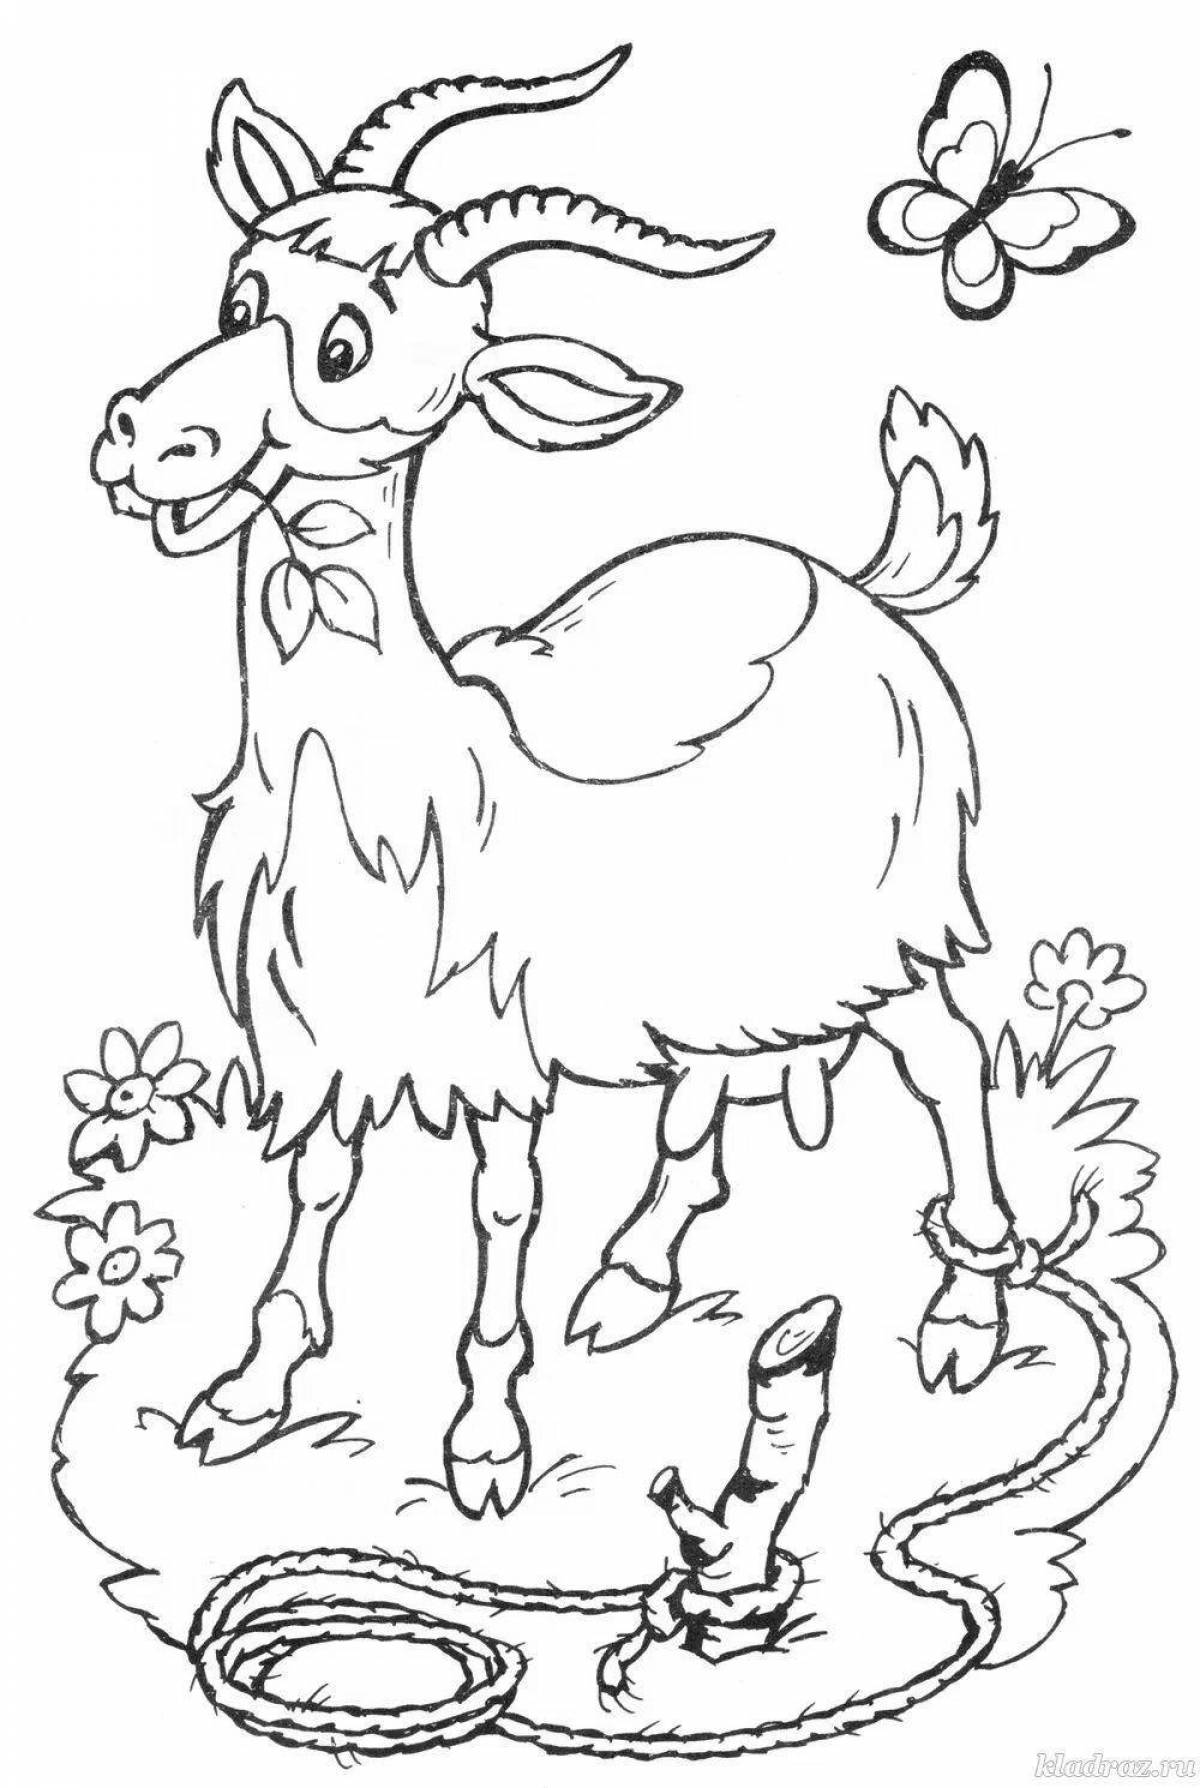 Live goat coloring book for children 5-6 years old